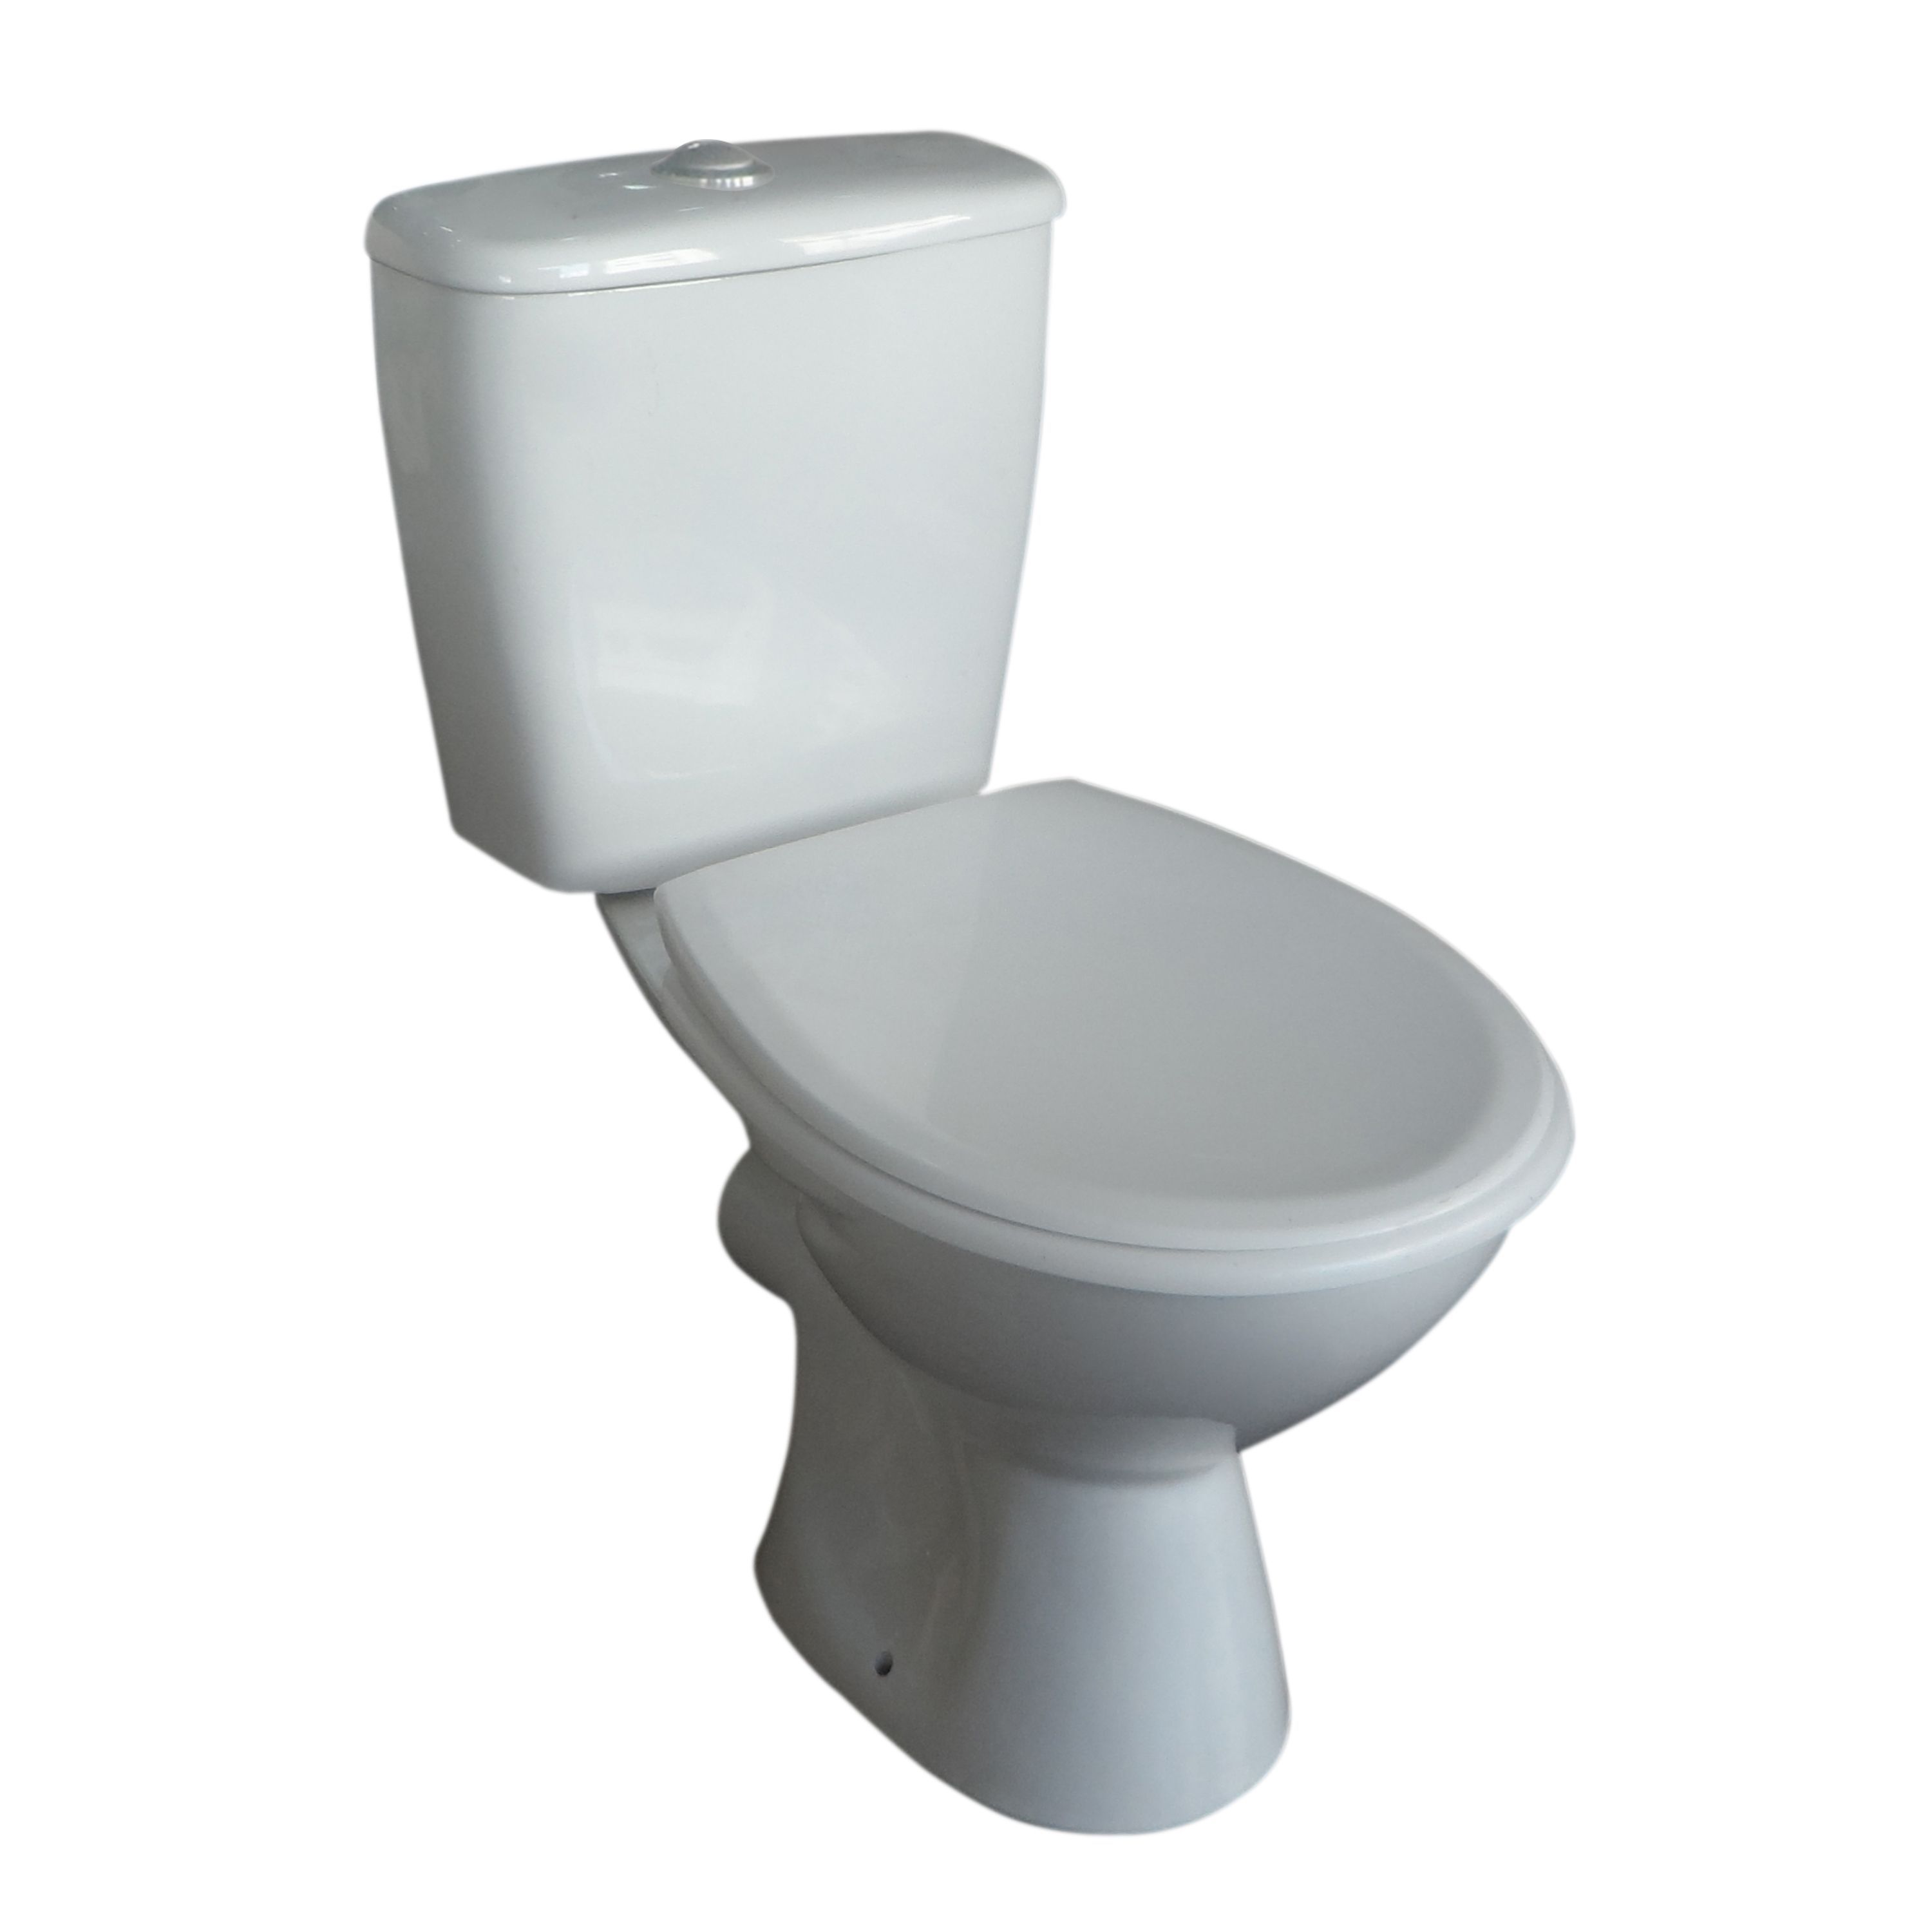 Plumbsure Bodmin Close-Coupled Toilet with Standard Close Seat ...